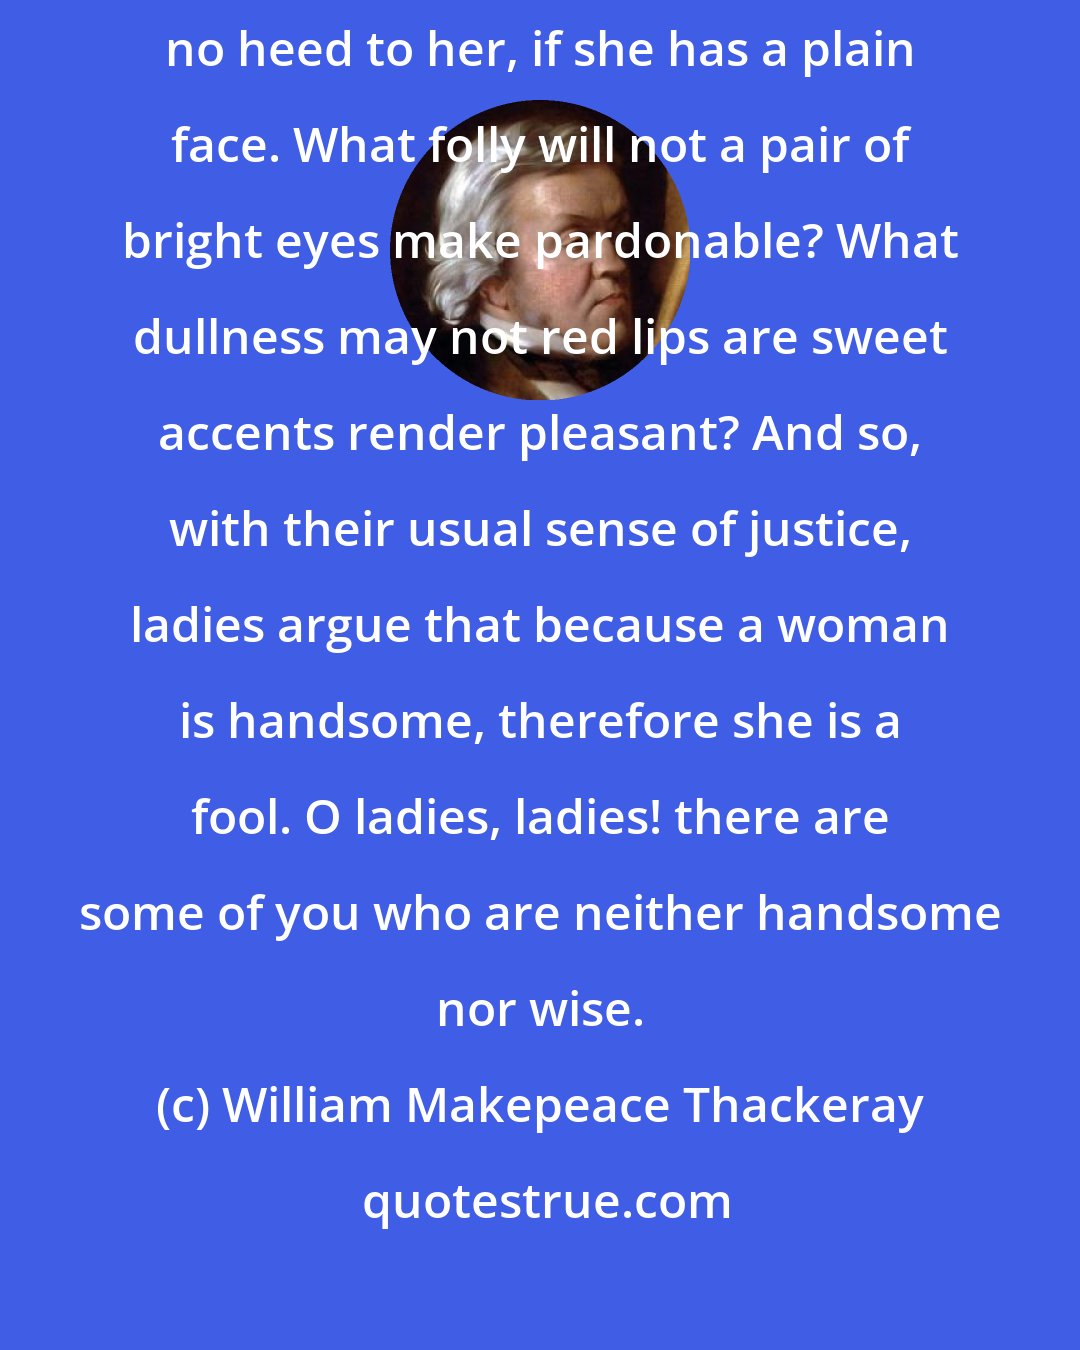 William Makepeace Thackeray: A woman may possess the wisdom and chastity of Minerva, and we give no heed to her, if she has a plain face. What folly will not a pair of bright eyes make pardonable? What dullness may not red lips are sweet accents render pleasant? And so, with their usual sense of justice, ladies argue that because a woman is handsome, therefore she is a fool. O ladies, ladies! there are some of you who are neither handsome nor wise.